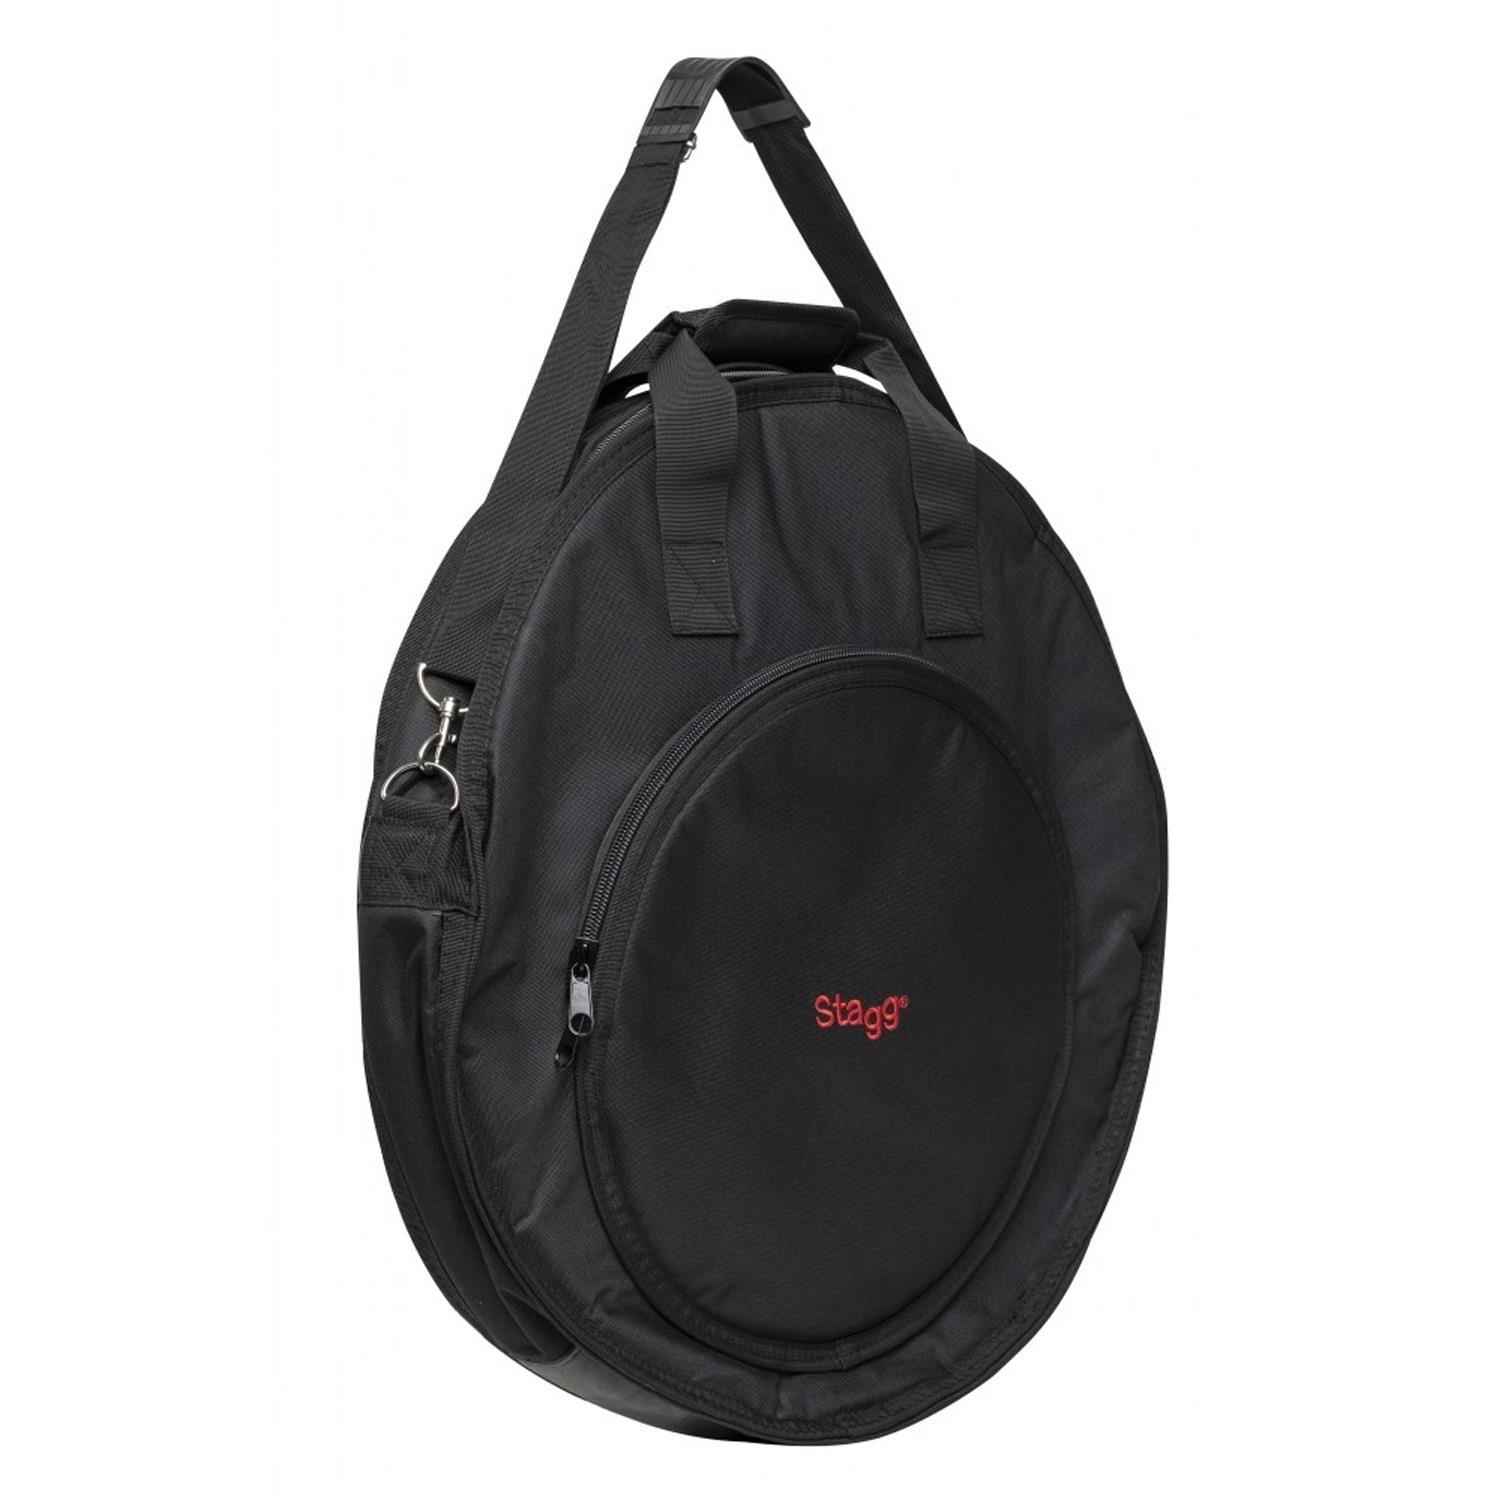 Stagg CYB-10 Cymbal Bag Heavily Padded - DY Pro Audio